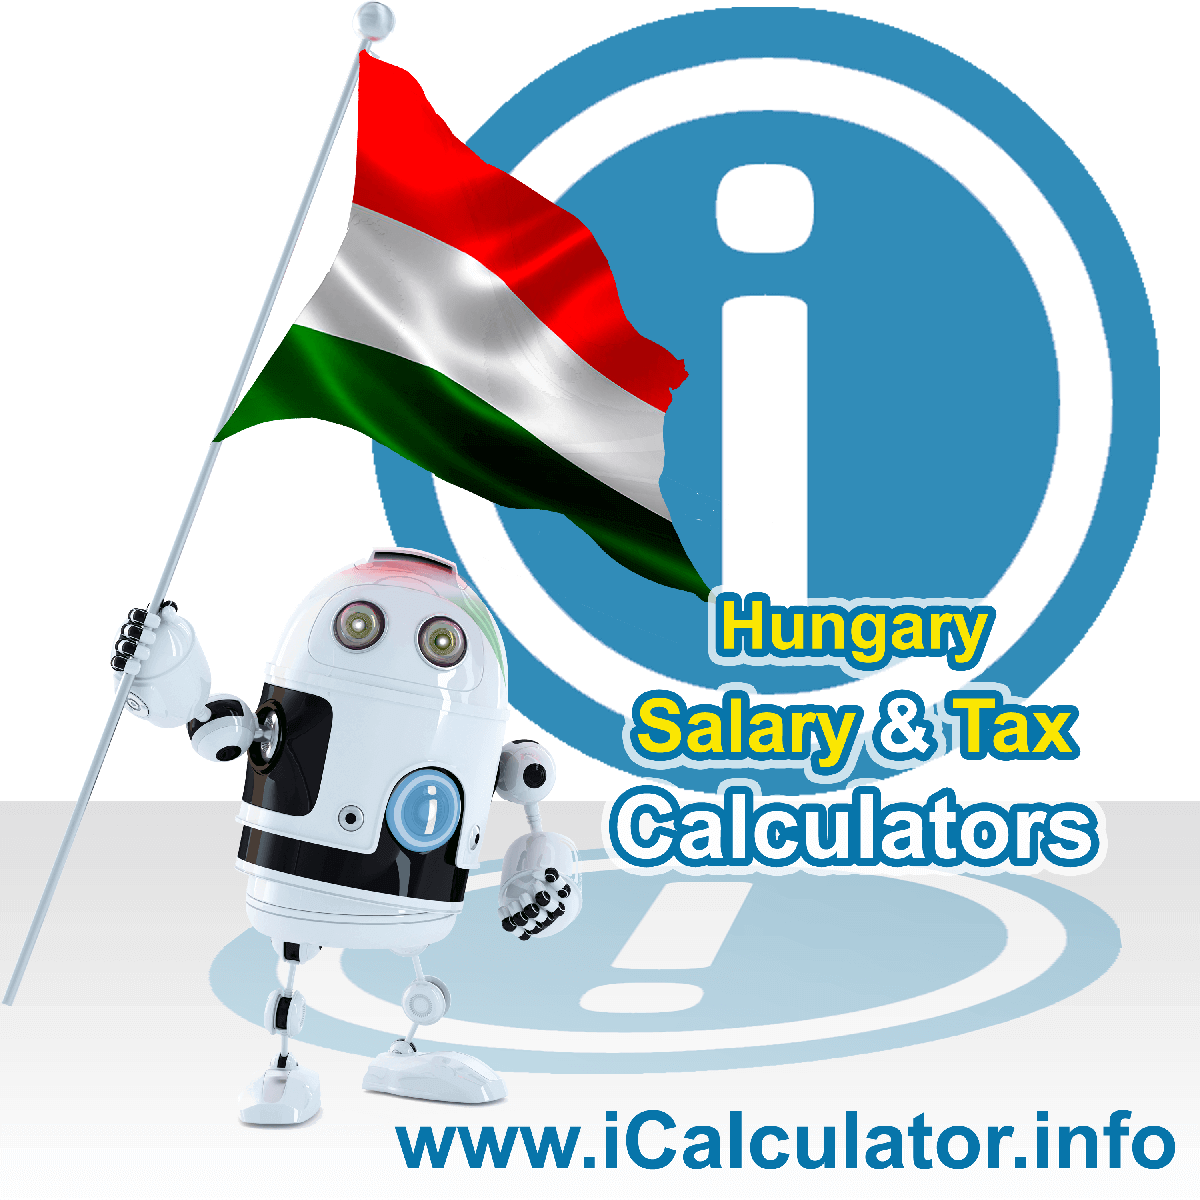 Hungary Wage Calculator. This image shows the Hungary flag and information relating to the tax formula for the Hungary Tax Calculator